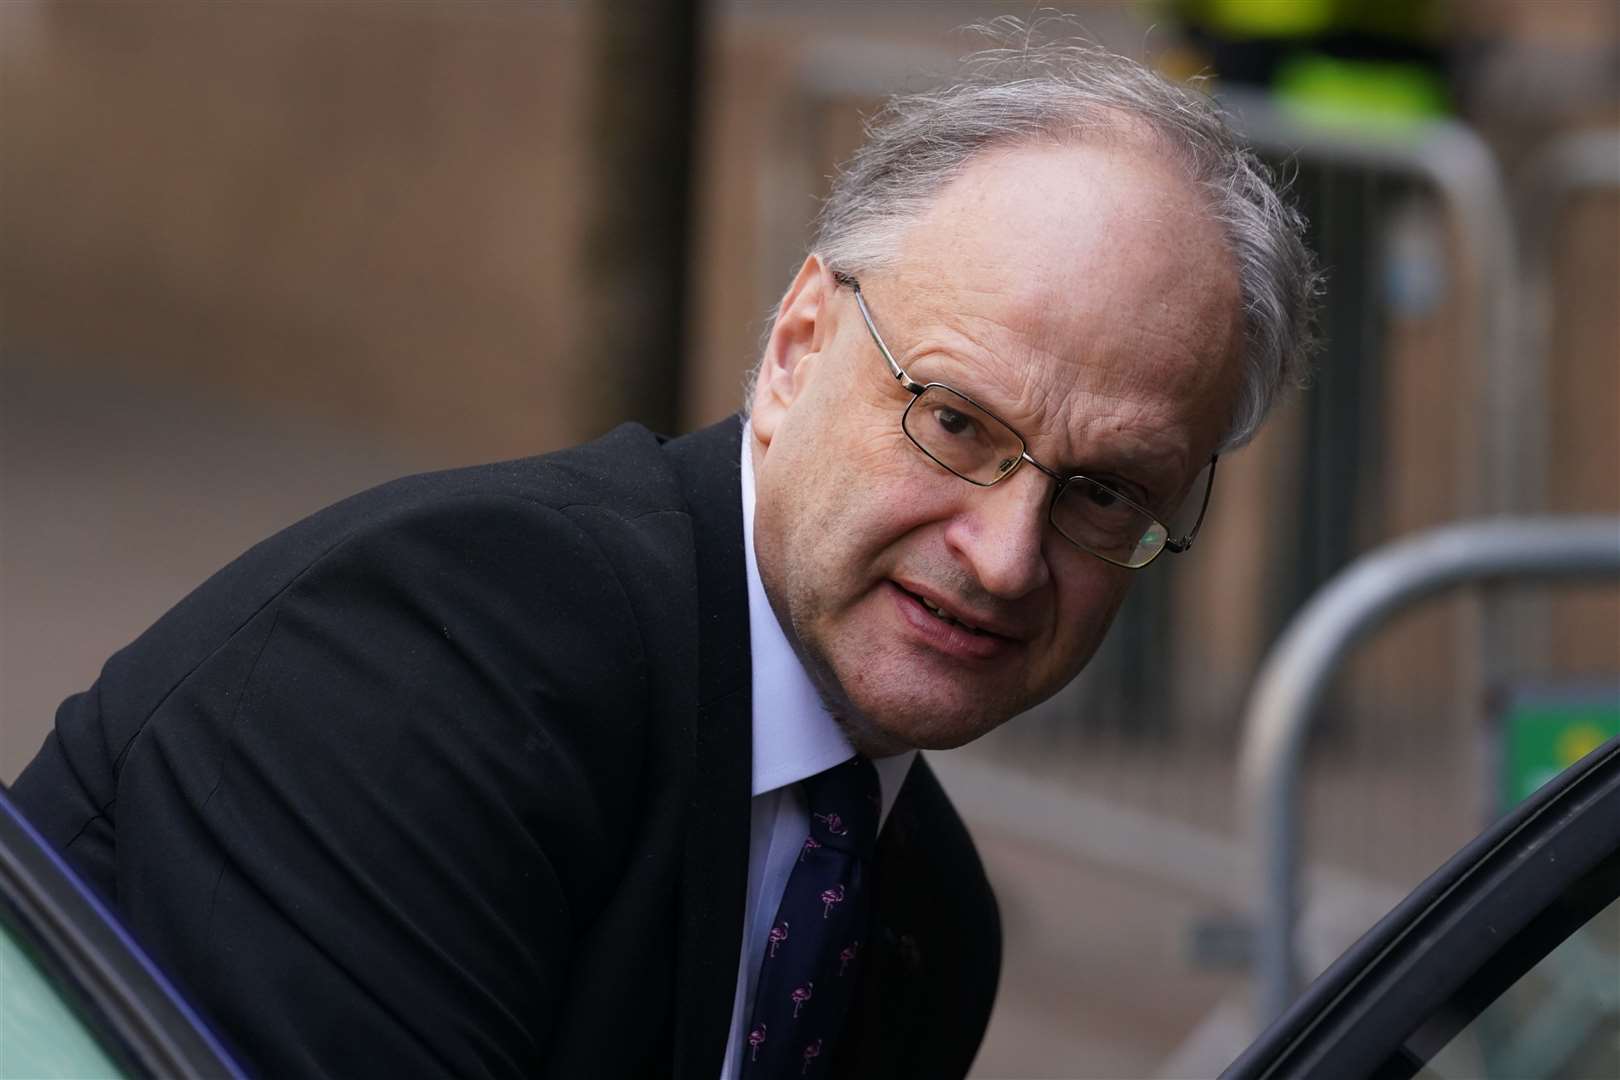 Former DUP education minister Lord Weir leaving the Clayton Hotel in Belfast (Brian Lawless/PA)